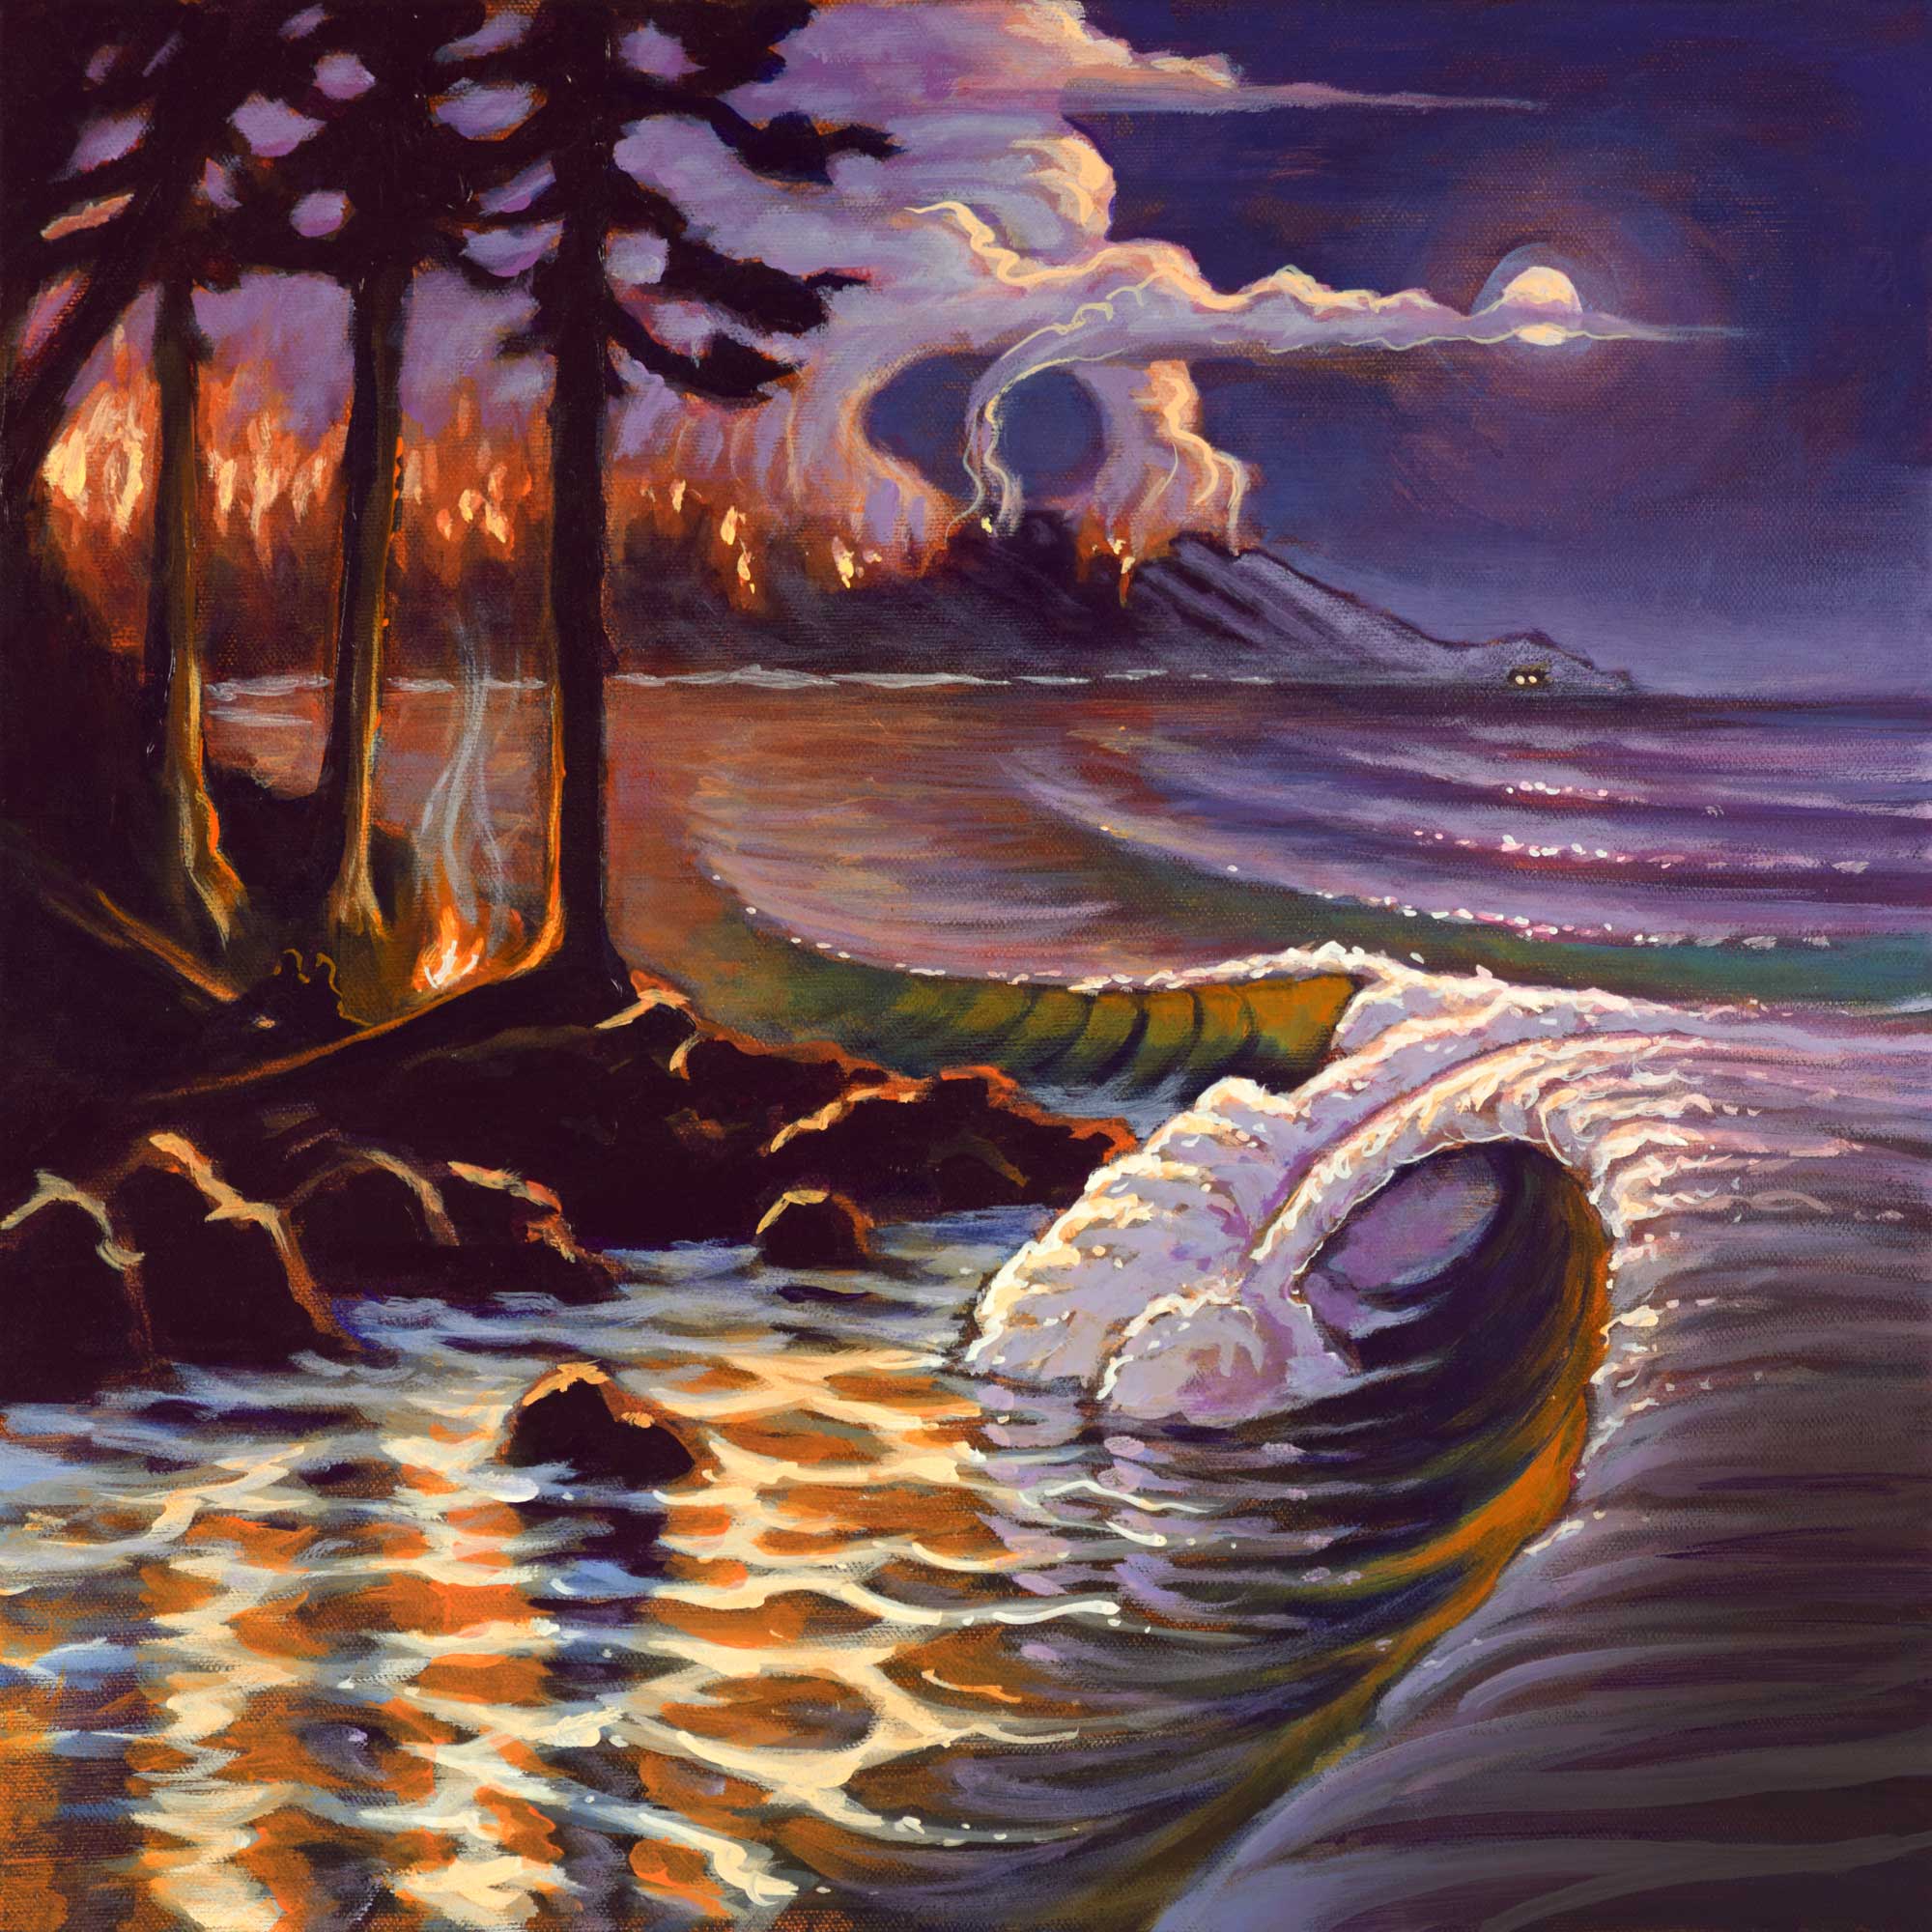 Painting of rocky coast at night with a wildfire in the distance